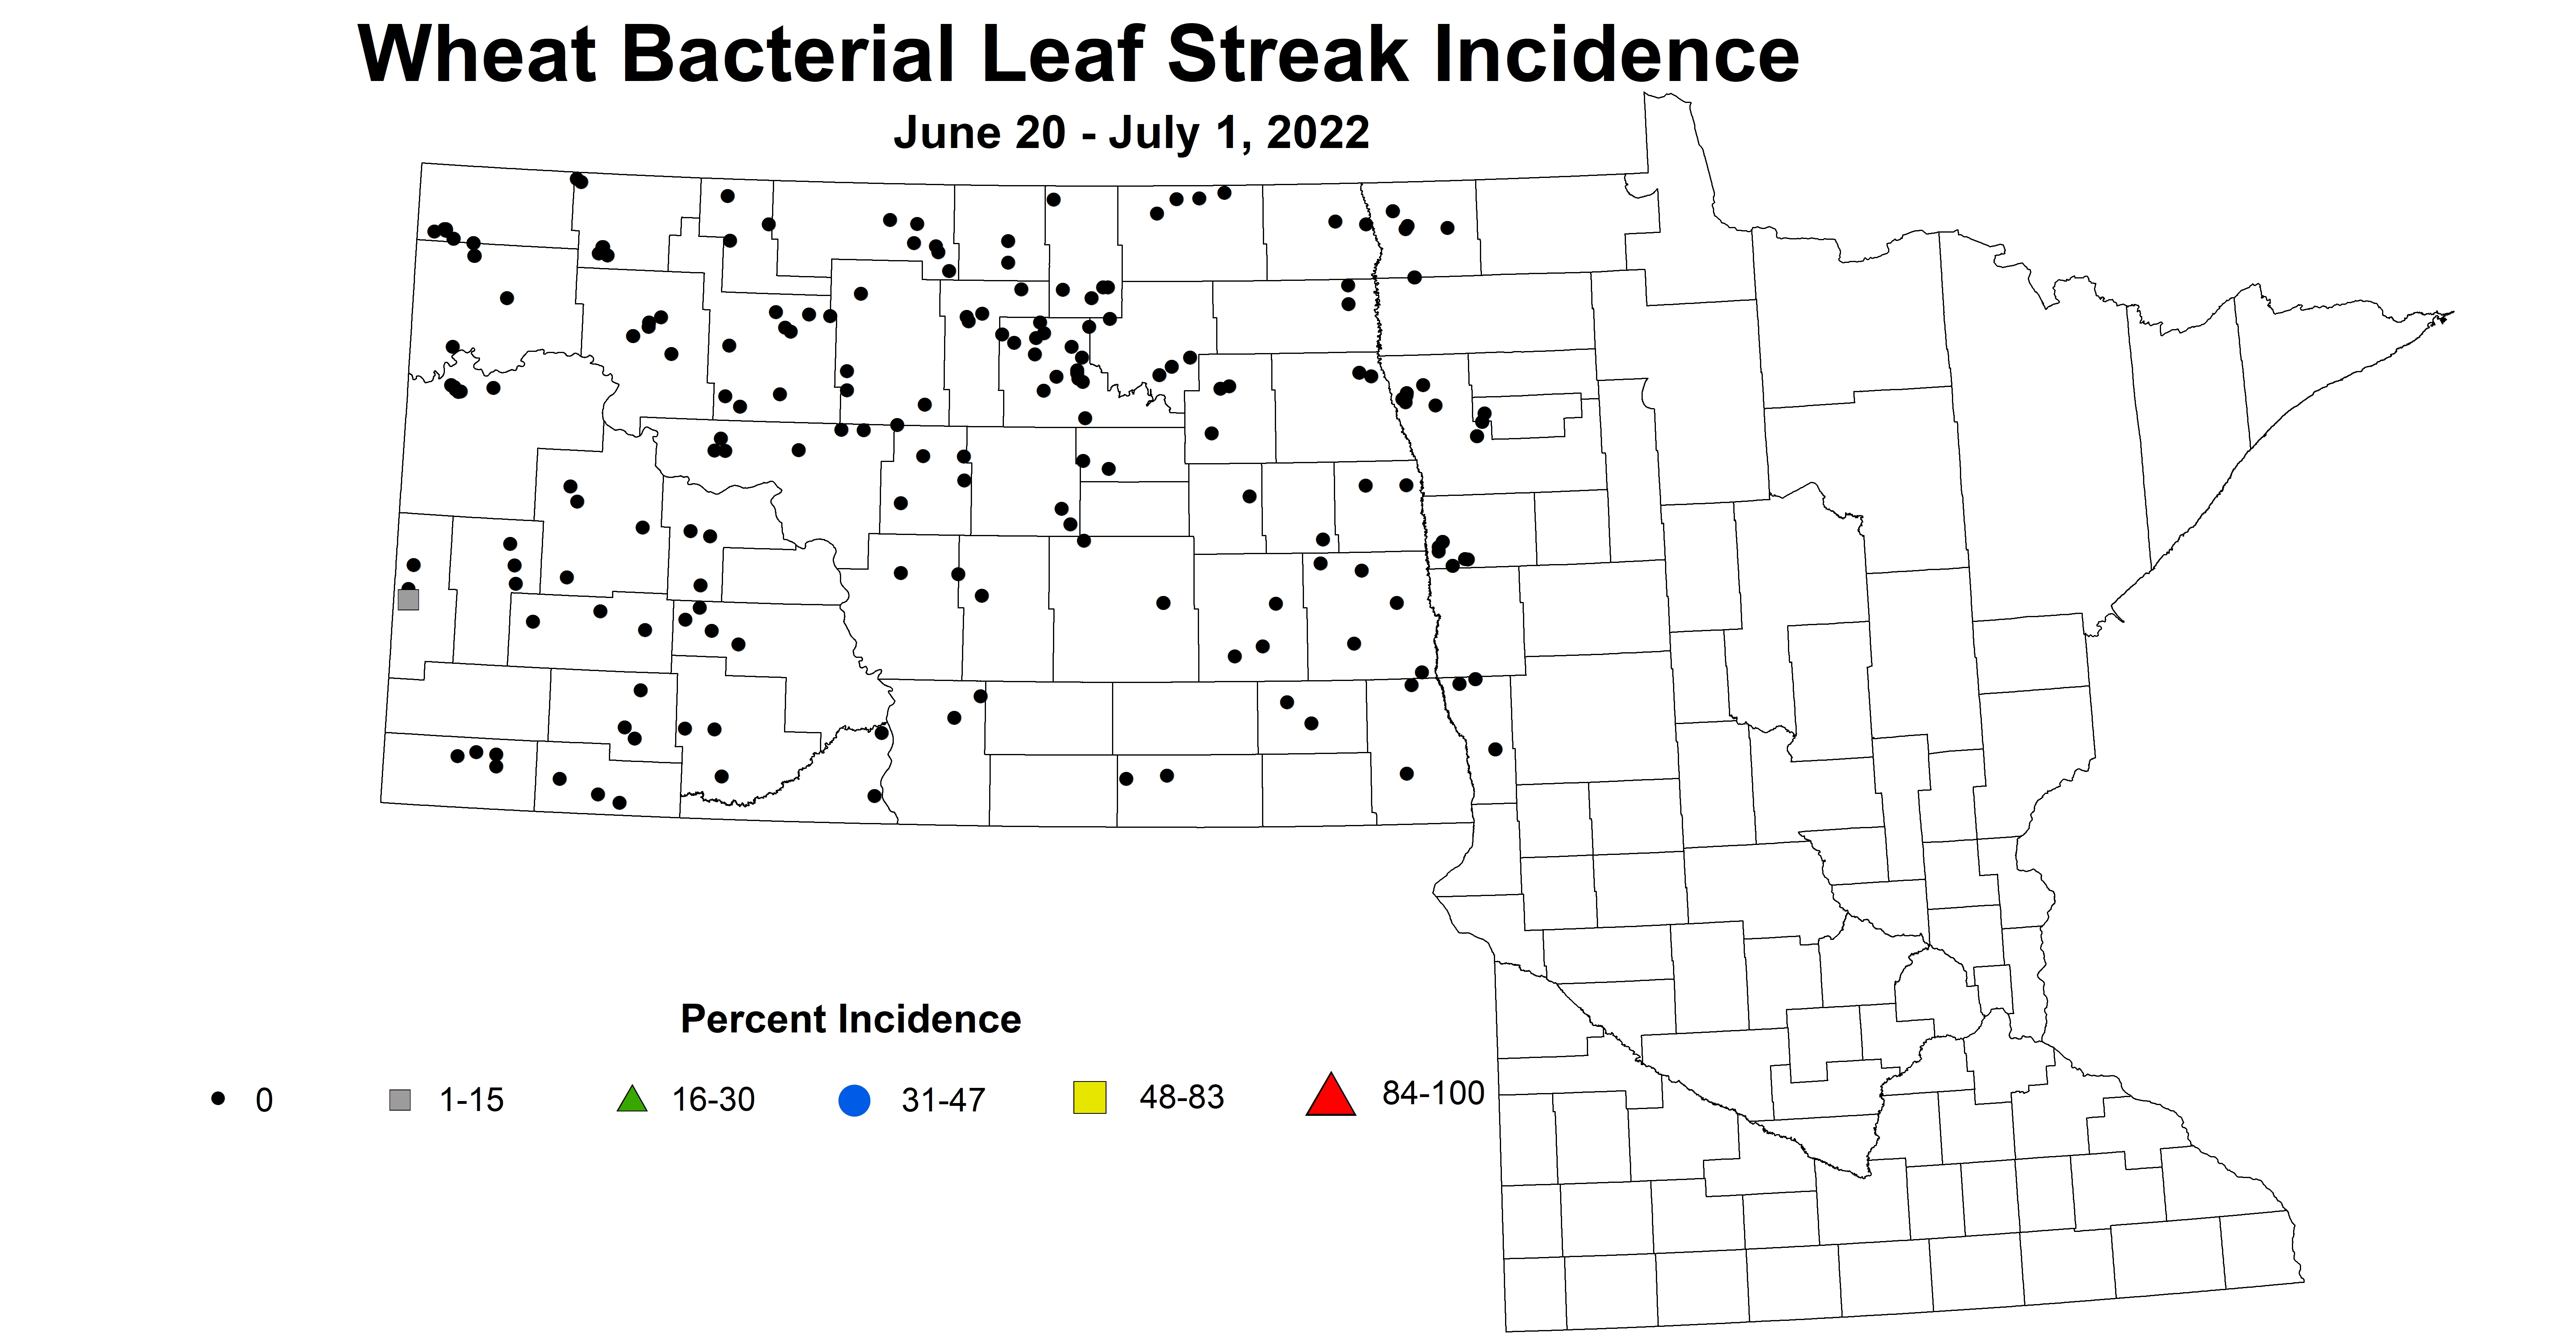 ND IPM map of wheat bacterial leaf streak incidence June 20 to July 1, 2022